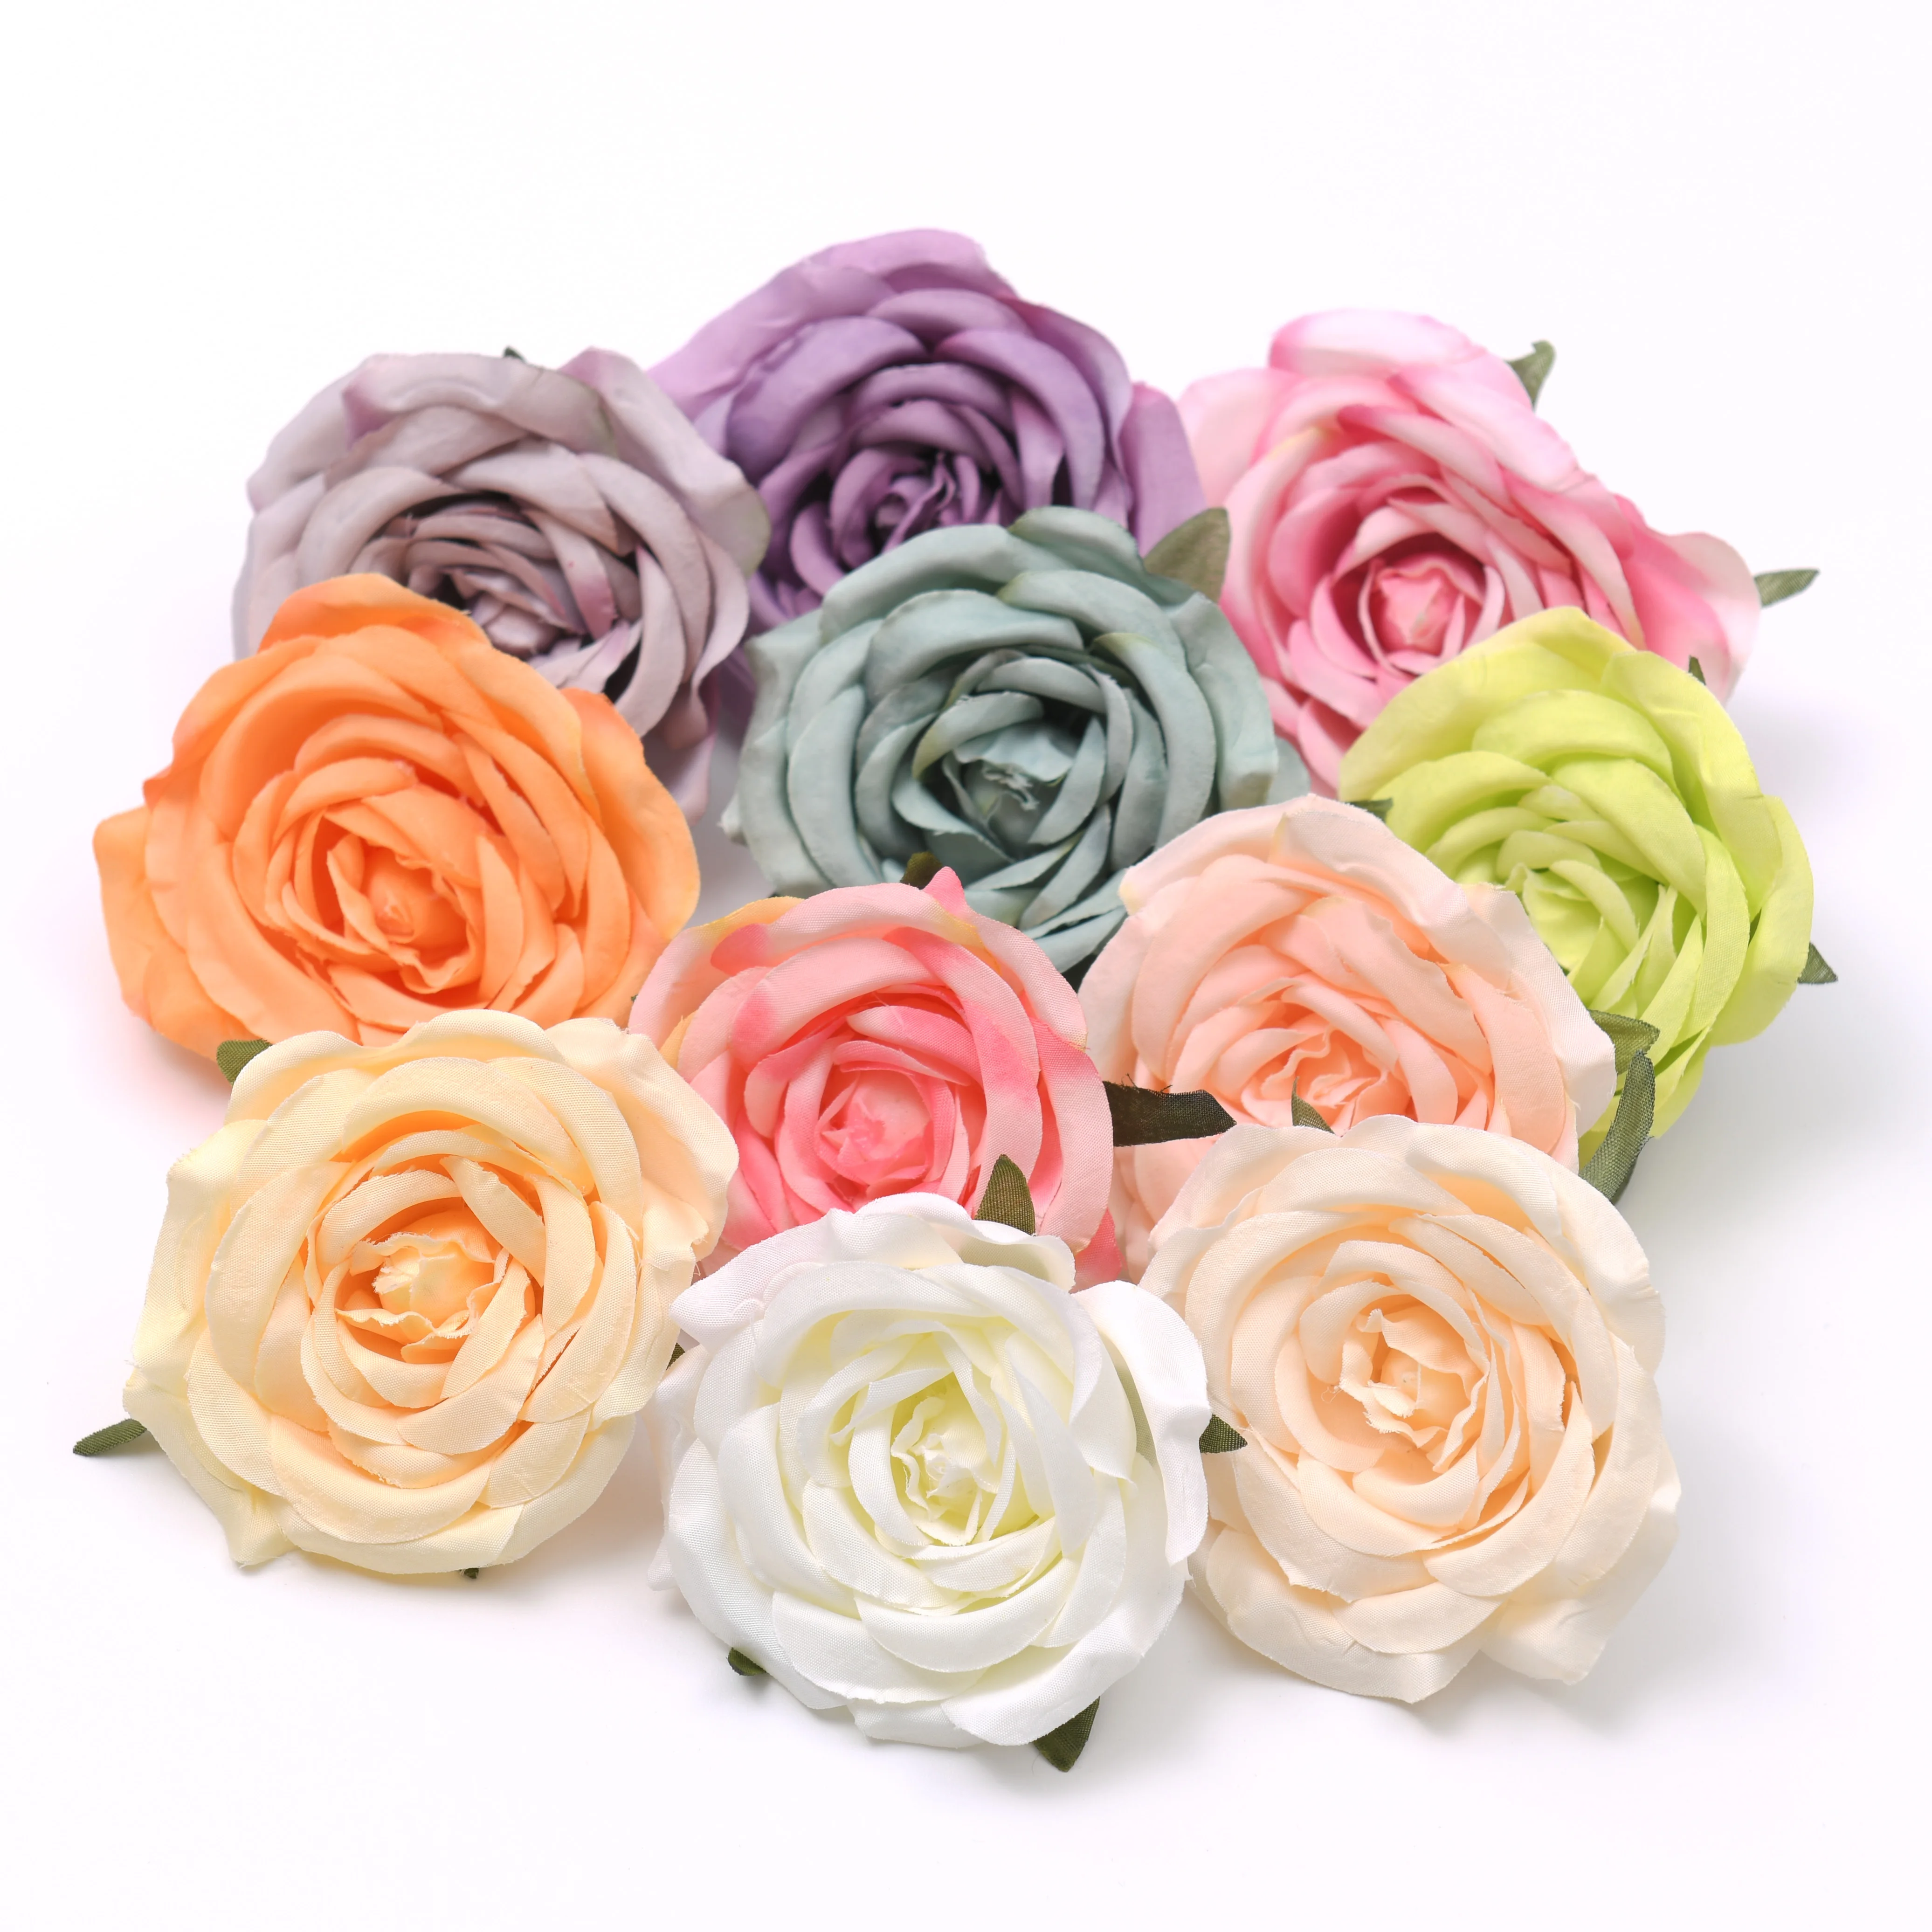 

10pcs 7cm Peony Artificial Silk Flower Heads Decorative Scrapbooking For Home Wedding Birthday Decoration Fake Rose Flowers